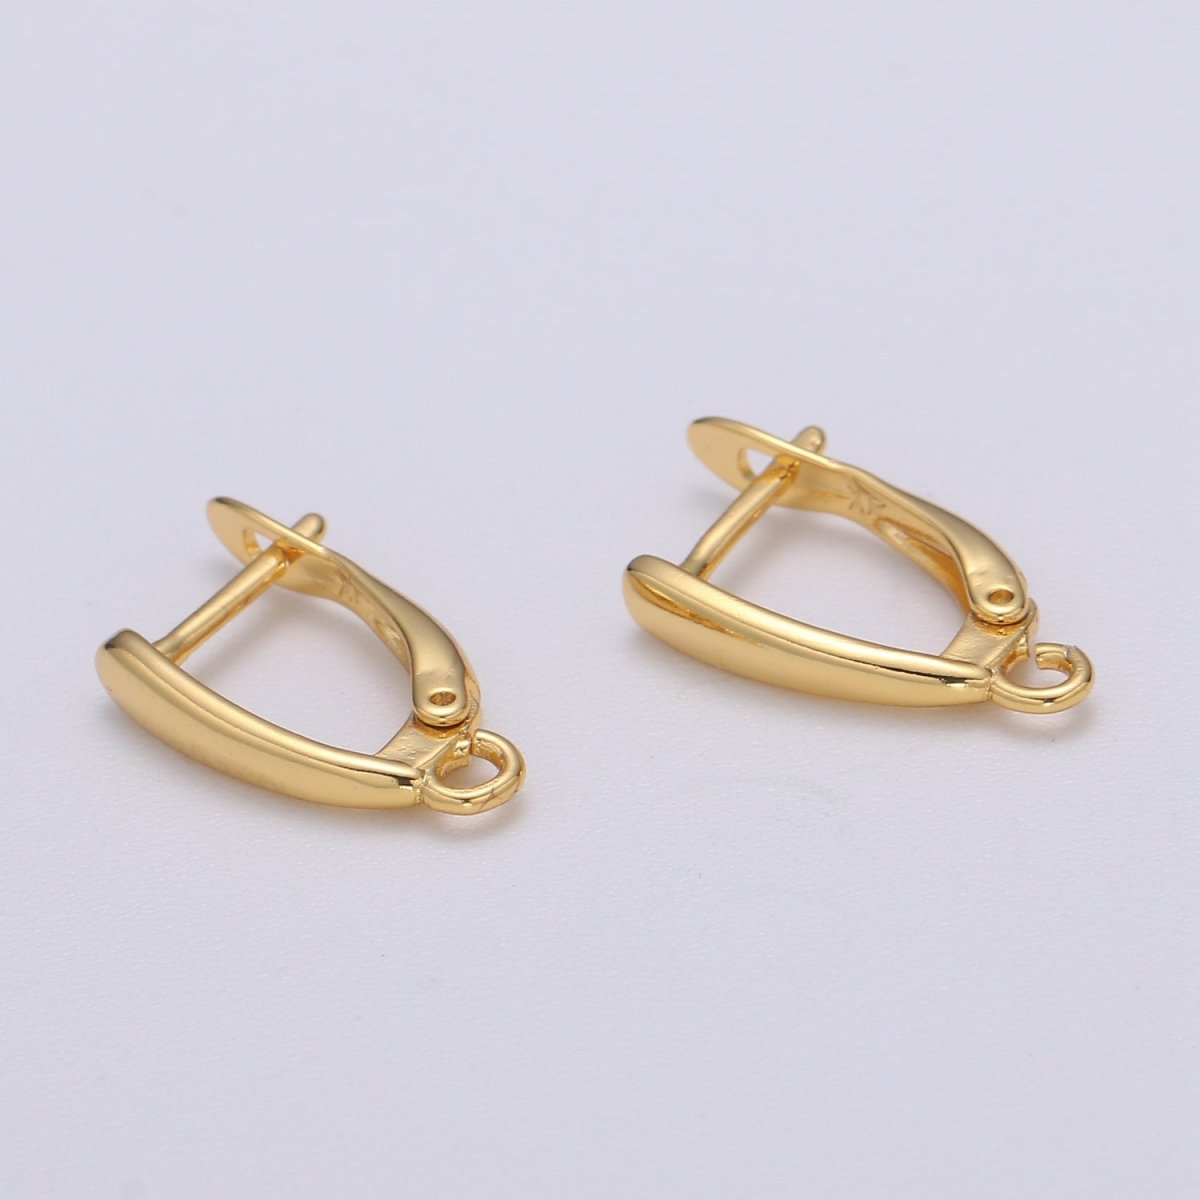 U Shaped Huggie Earring 24K Gold Filled Simple Hoops with open link for Jewelry Making Supply L-228 - DLUXCA